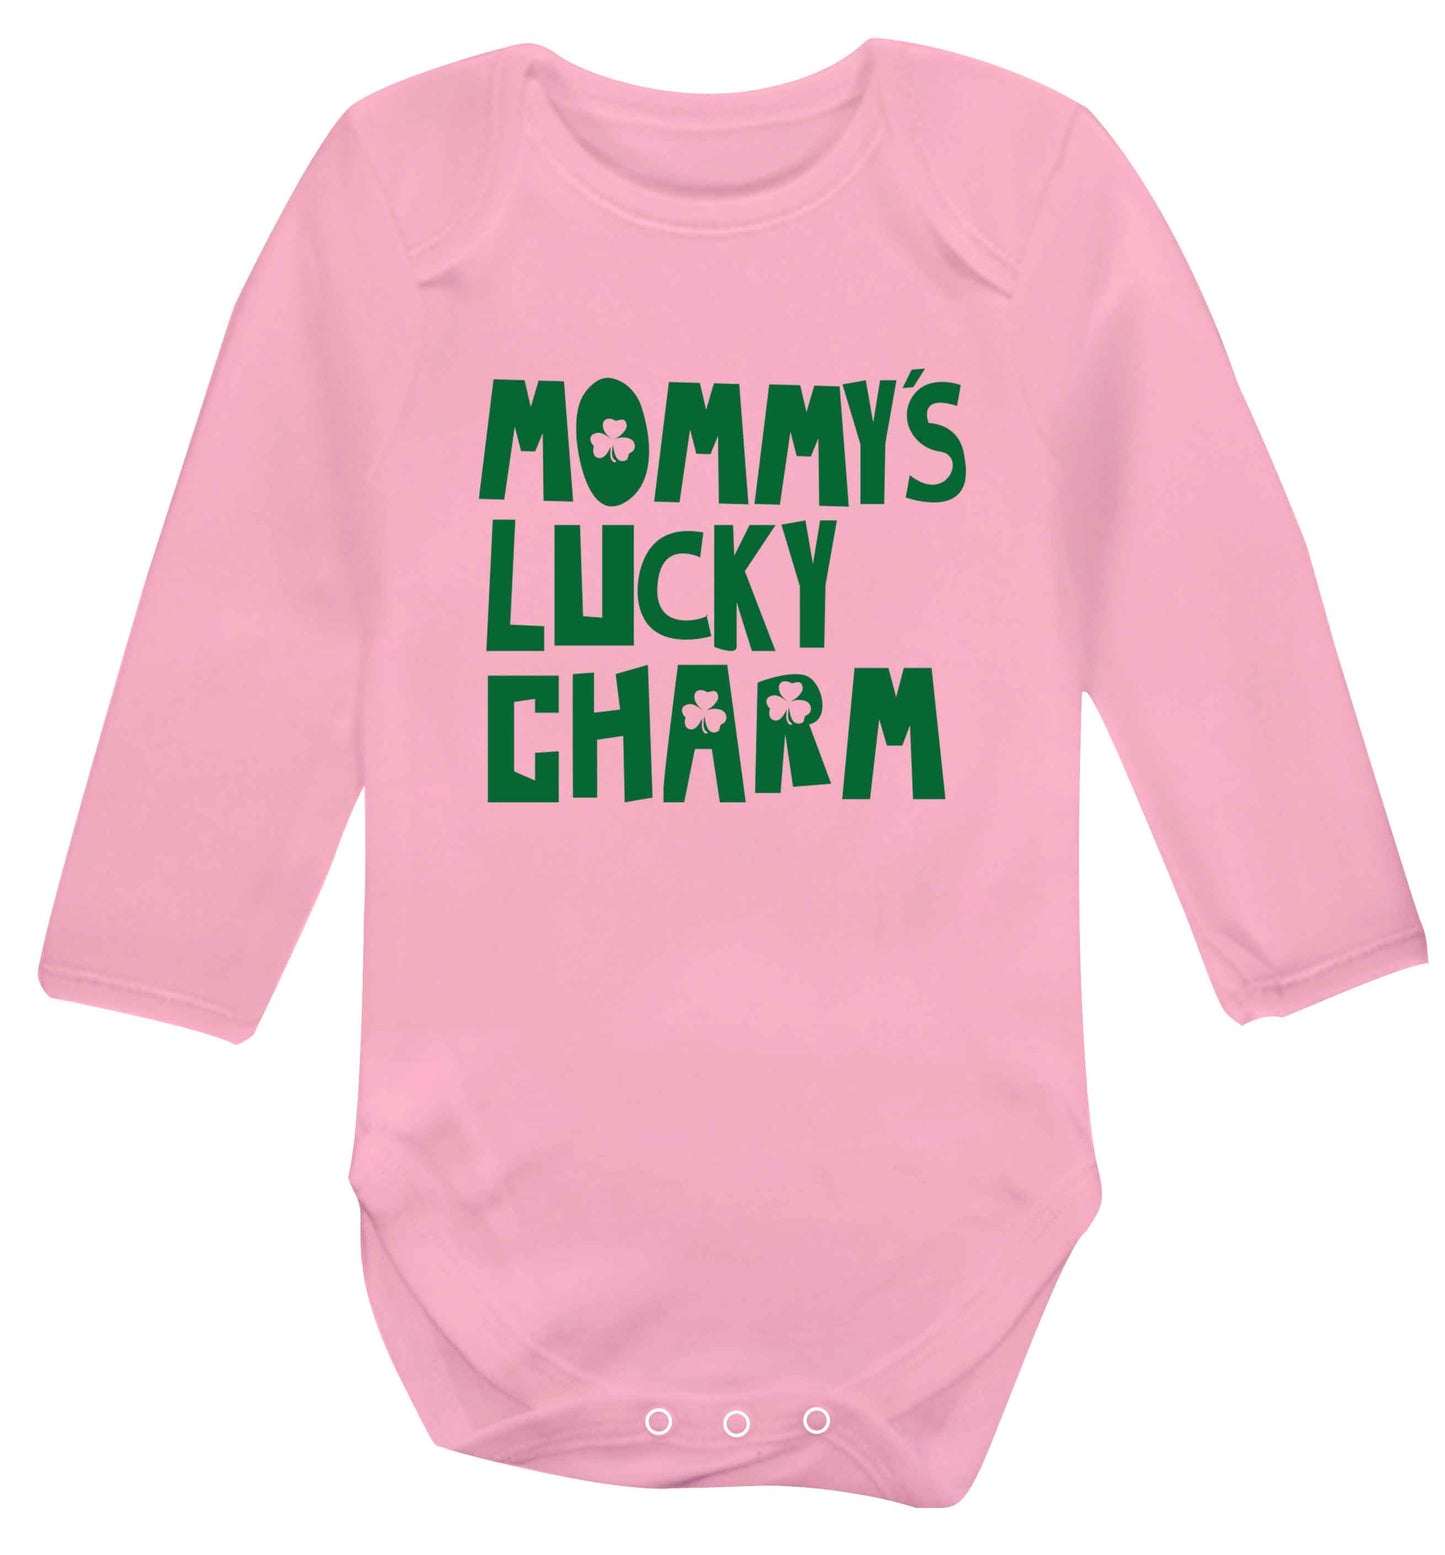 Mommy's lucky charm baby vest long sleeved pale pink 6-12 months